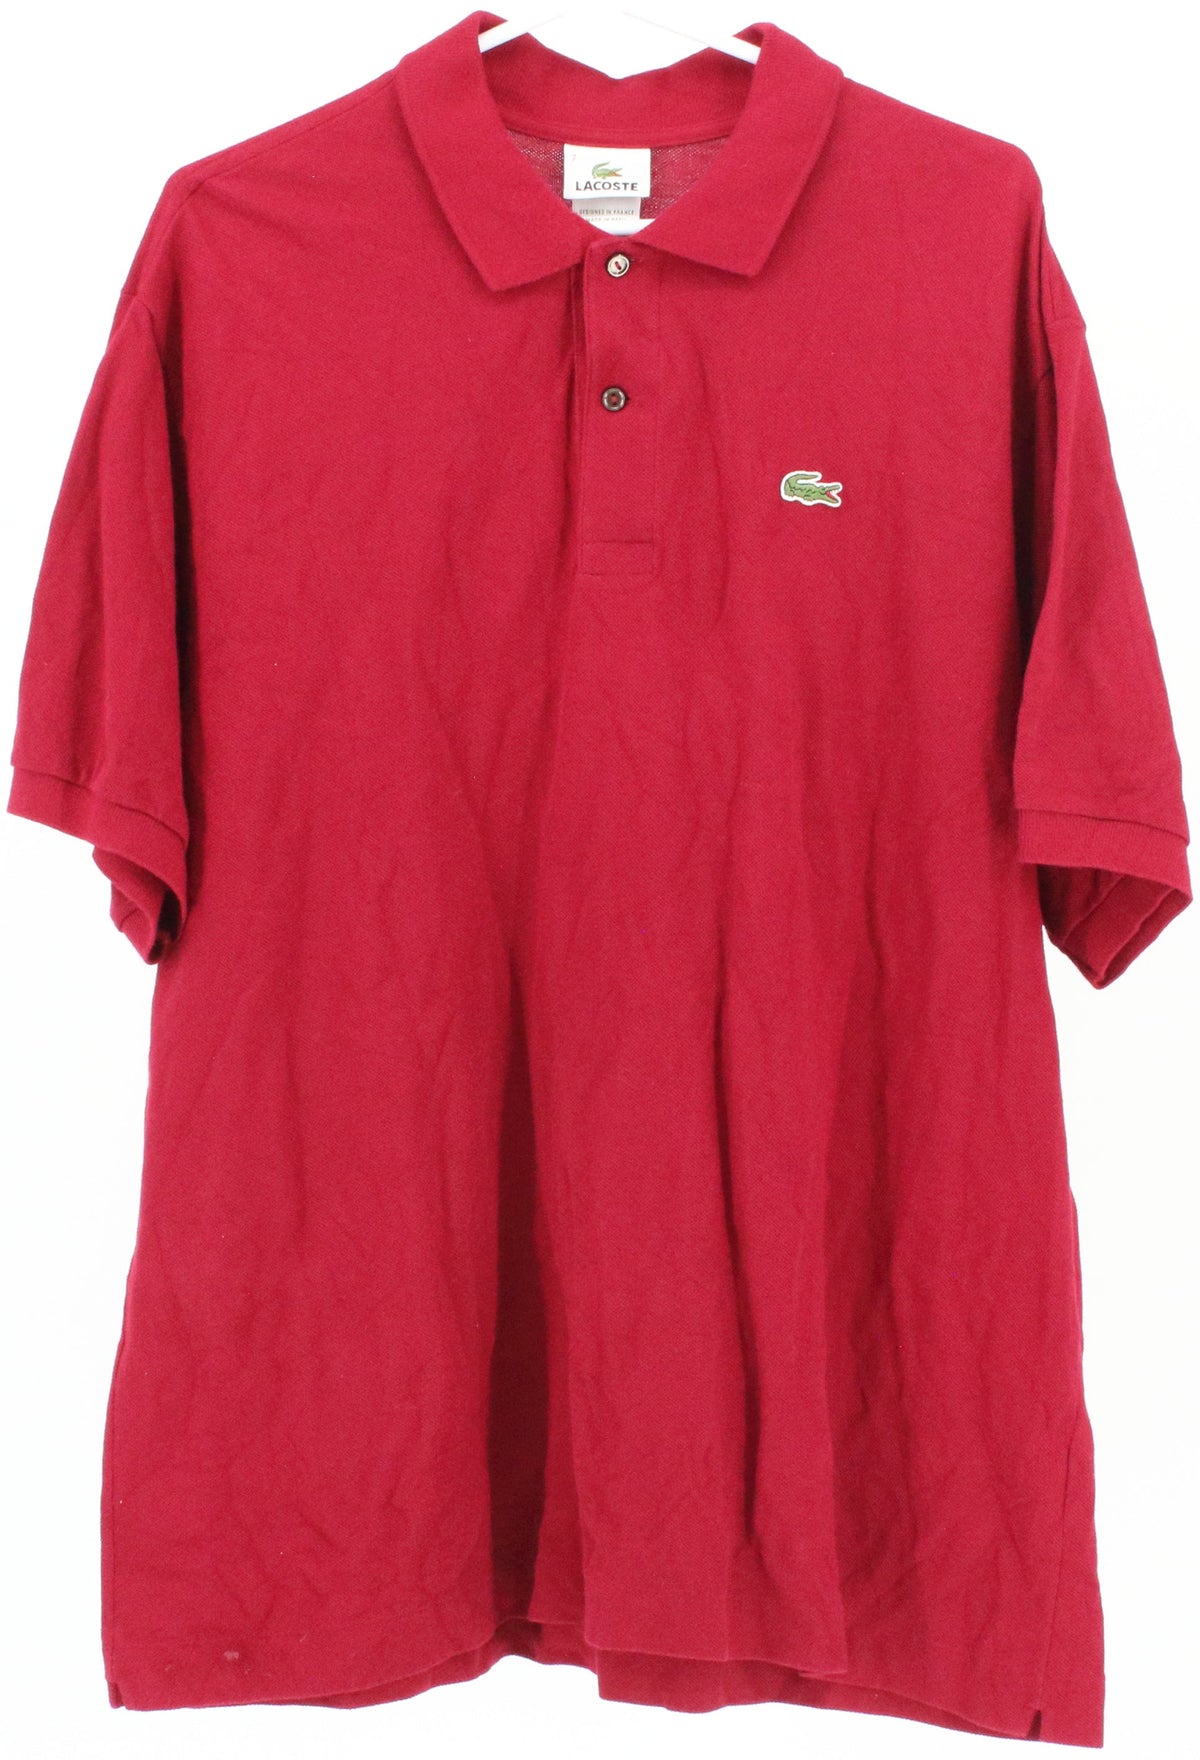 Lacoste Dark Red Polo Shirt